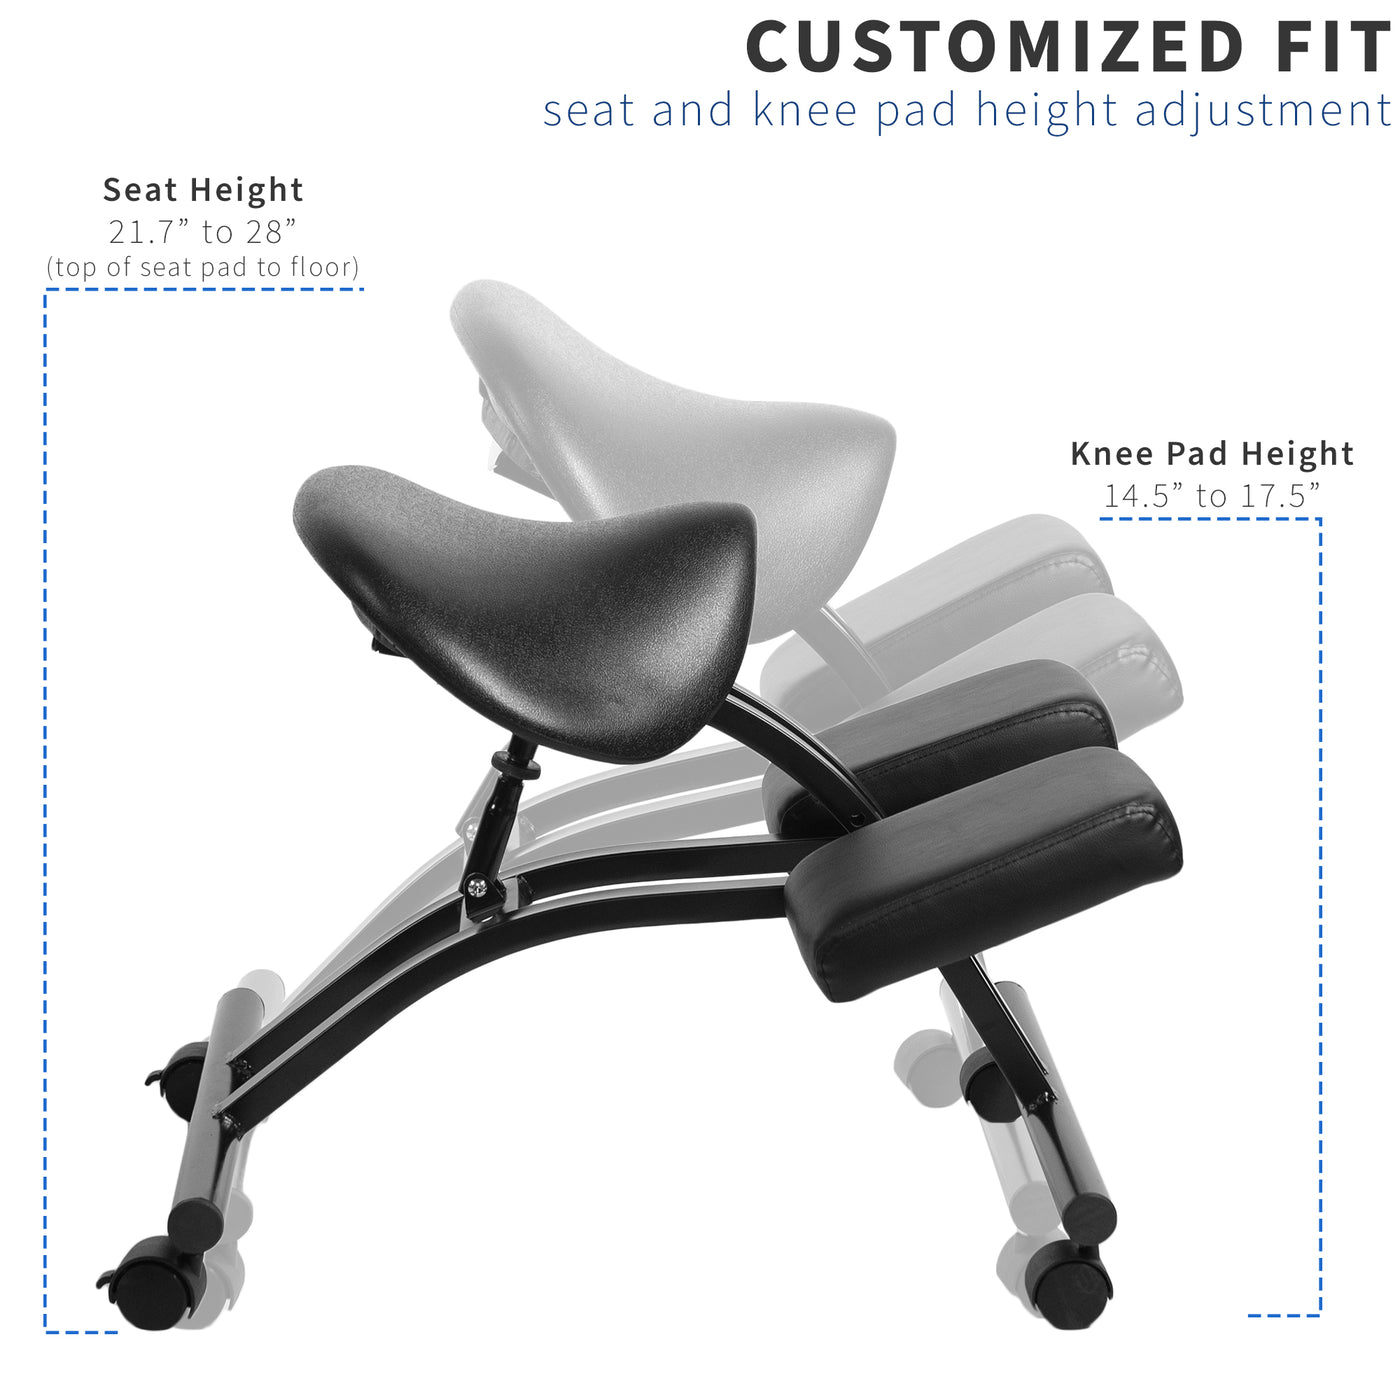 Sturdy saddle seat kneeling chair with adjustable seat height and knee pad height.